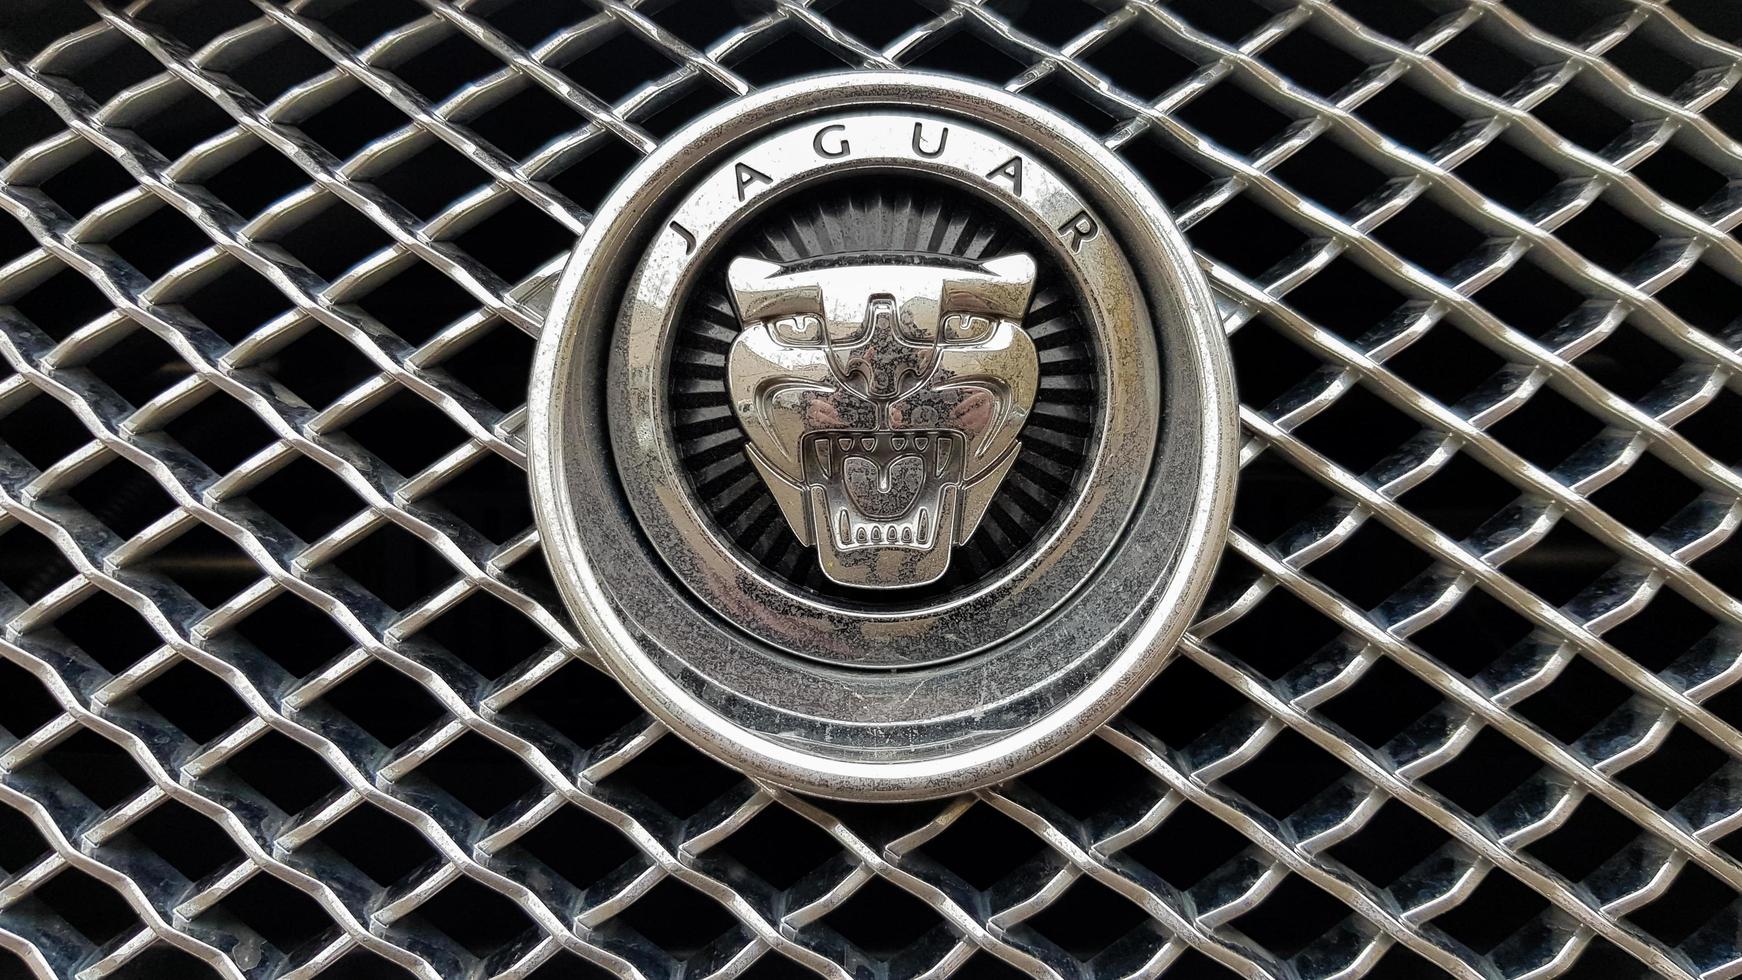 Ukraine, Kiev - March 27, 2020. Close-up view of the Jaguar logo on a new car radiator grill. Founded in 1922, the British multinational luxury car manufacturer headquartered in Coventry, England. photo